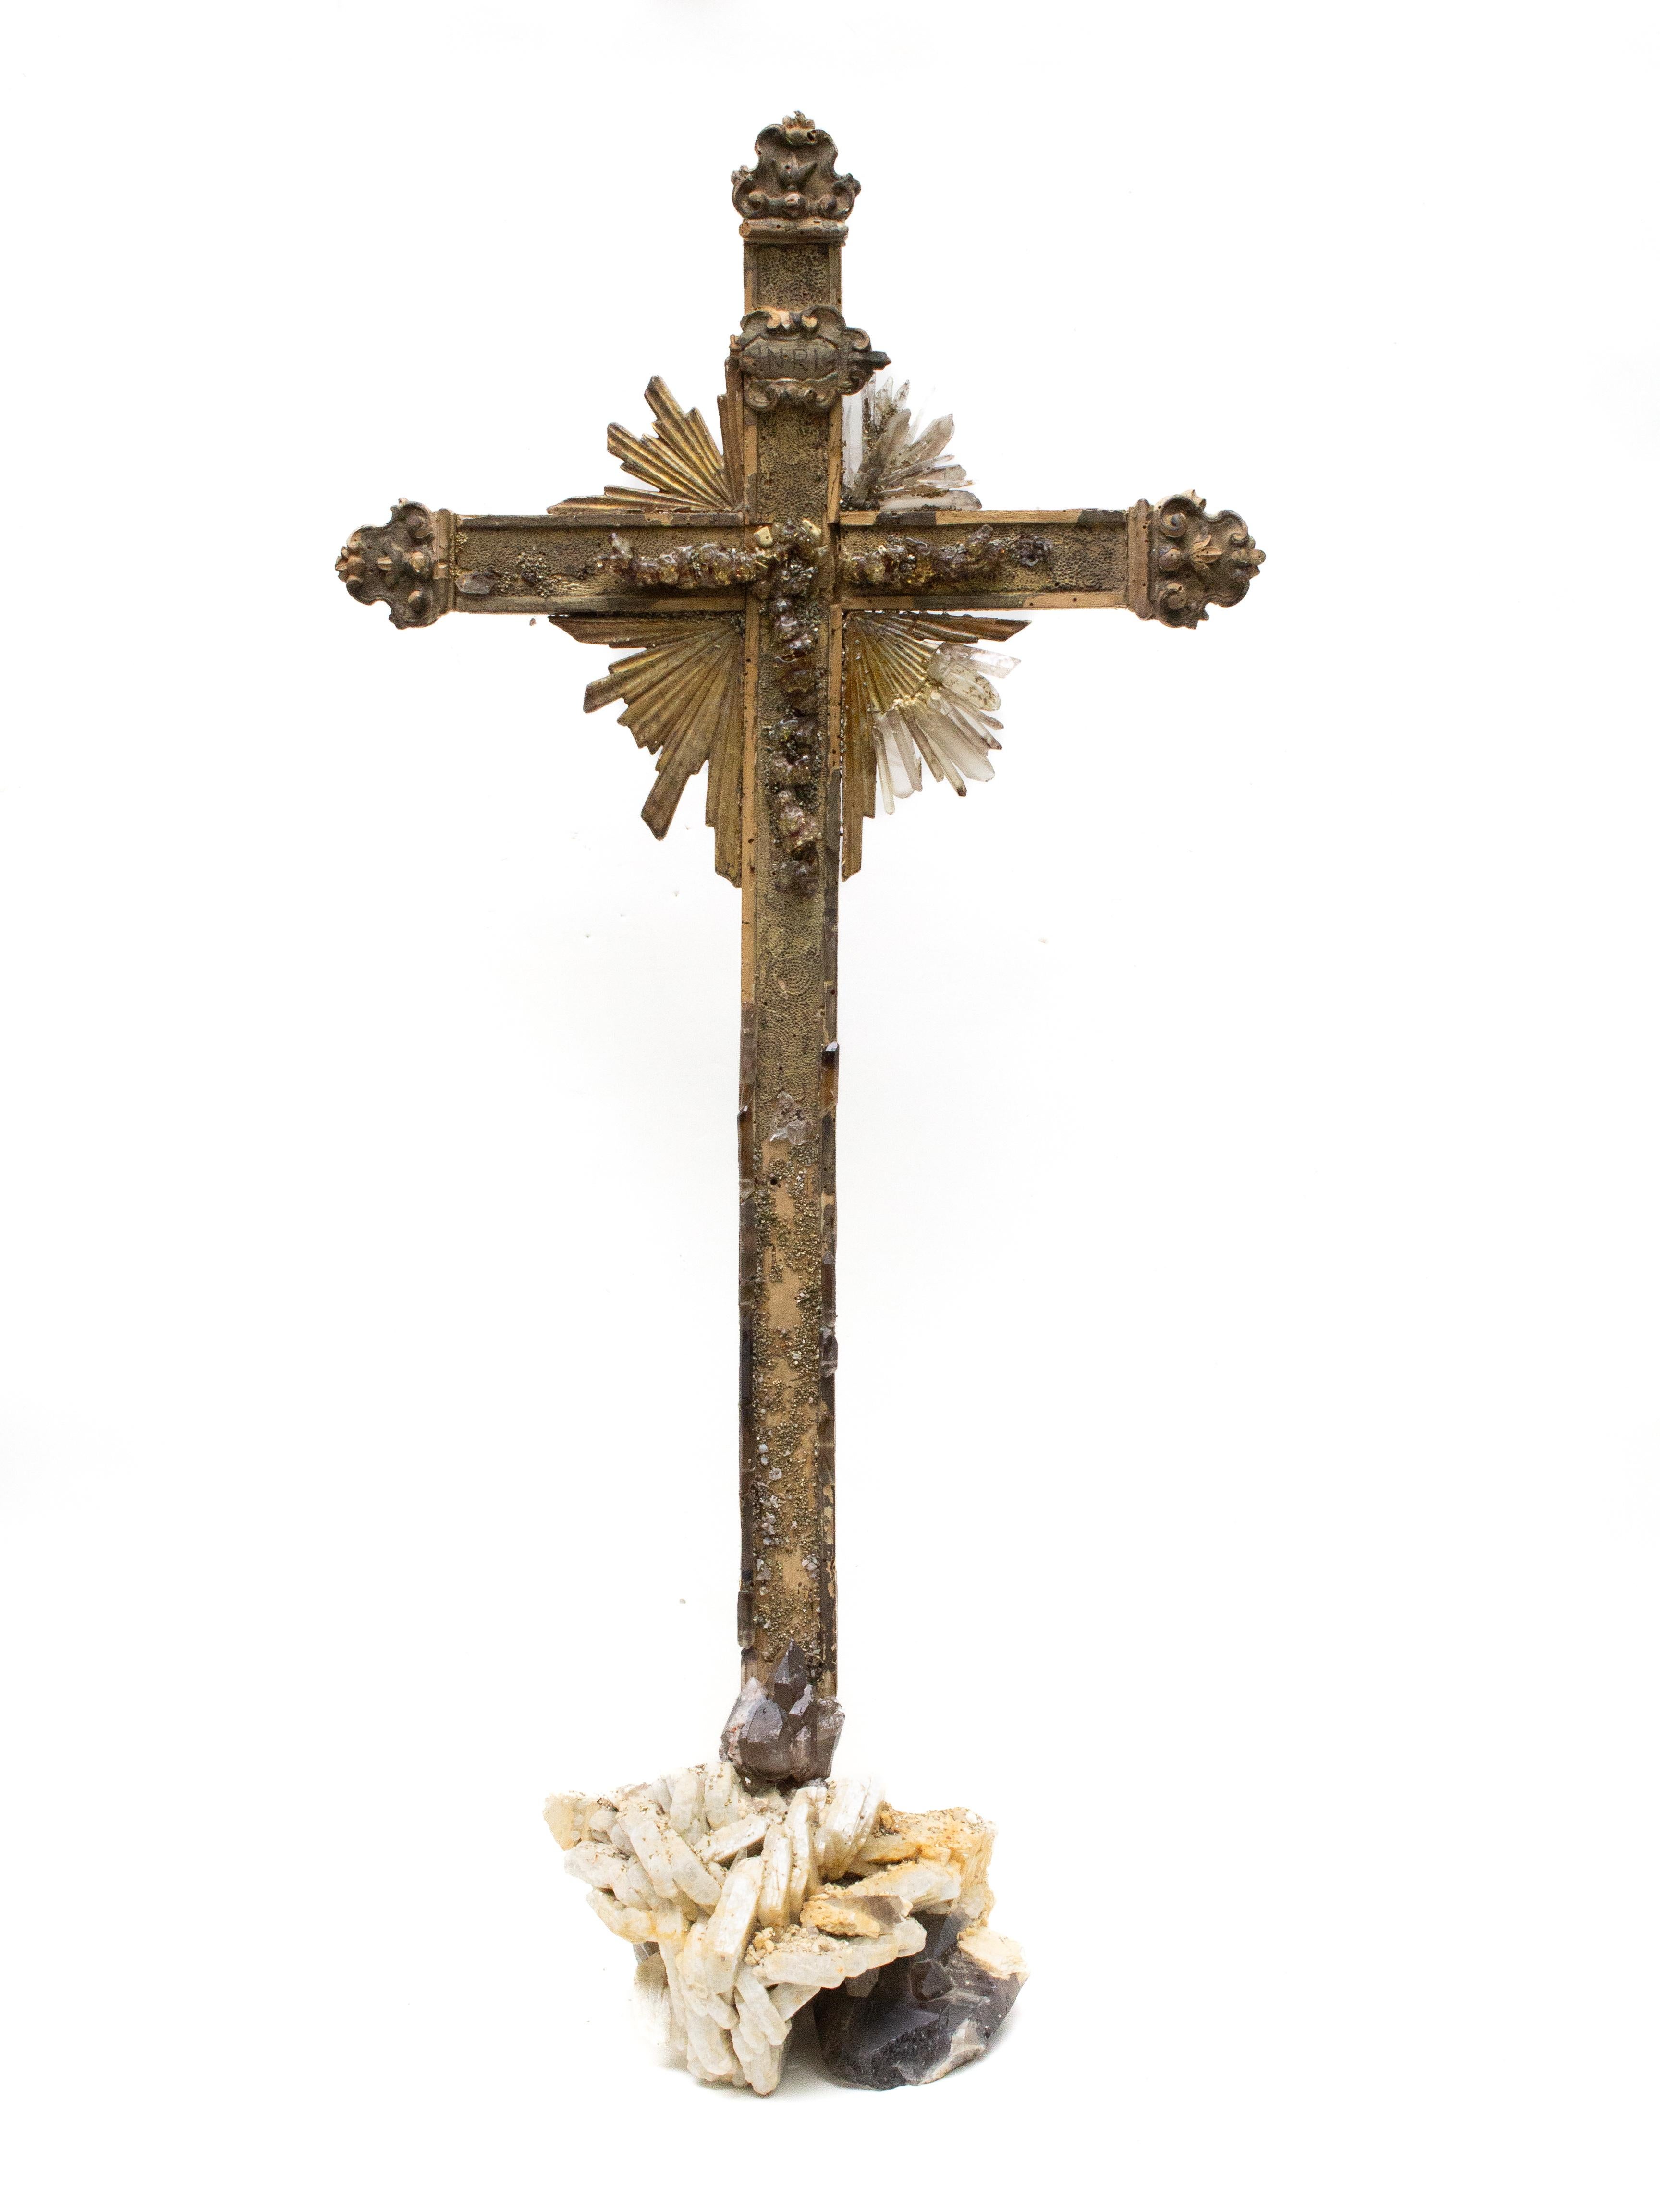 Sculptural 18th century Italian cross mounted on smoky quartz crystals in matrix with pyrite formations. The center of the cross has an abstract figure of Christ created from acrylic crystals. The missing sunrays are replaced with the smoky quartz